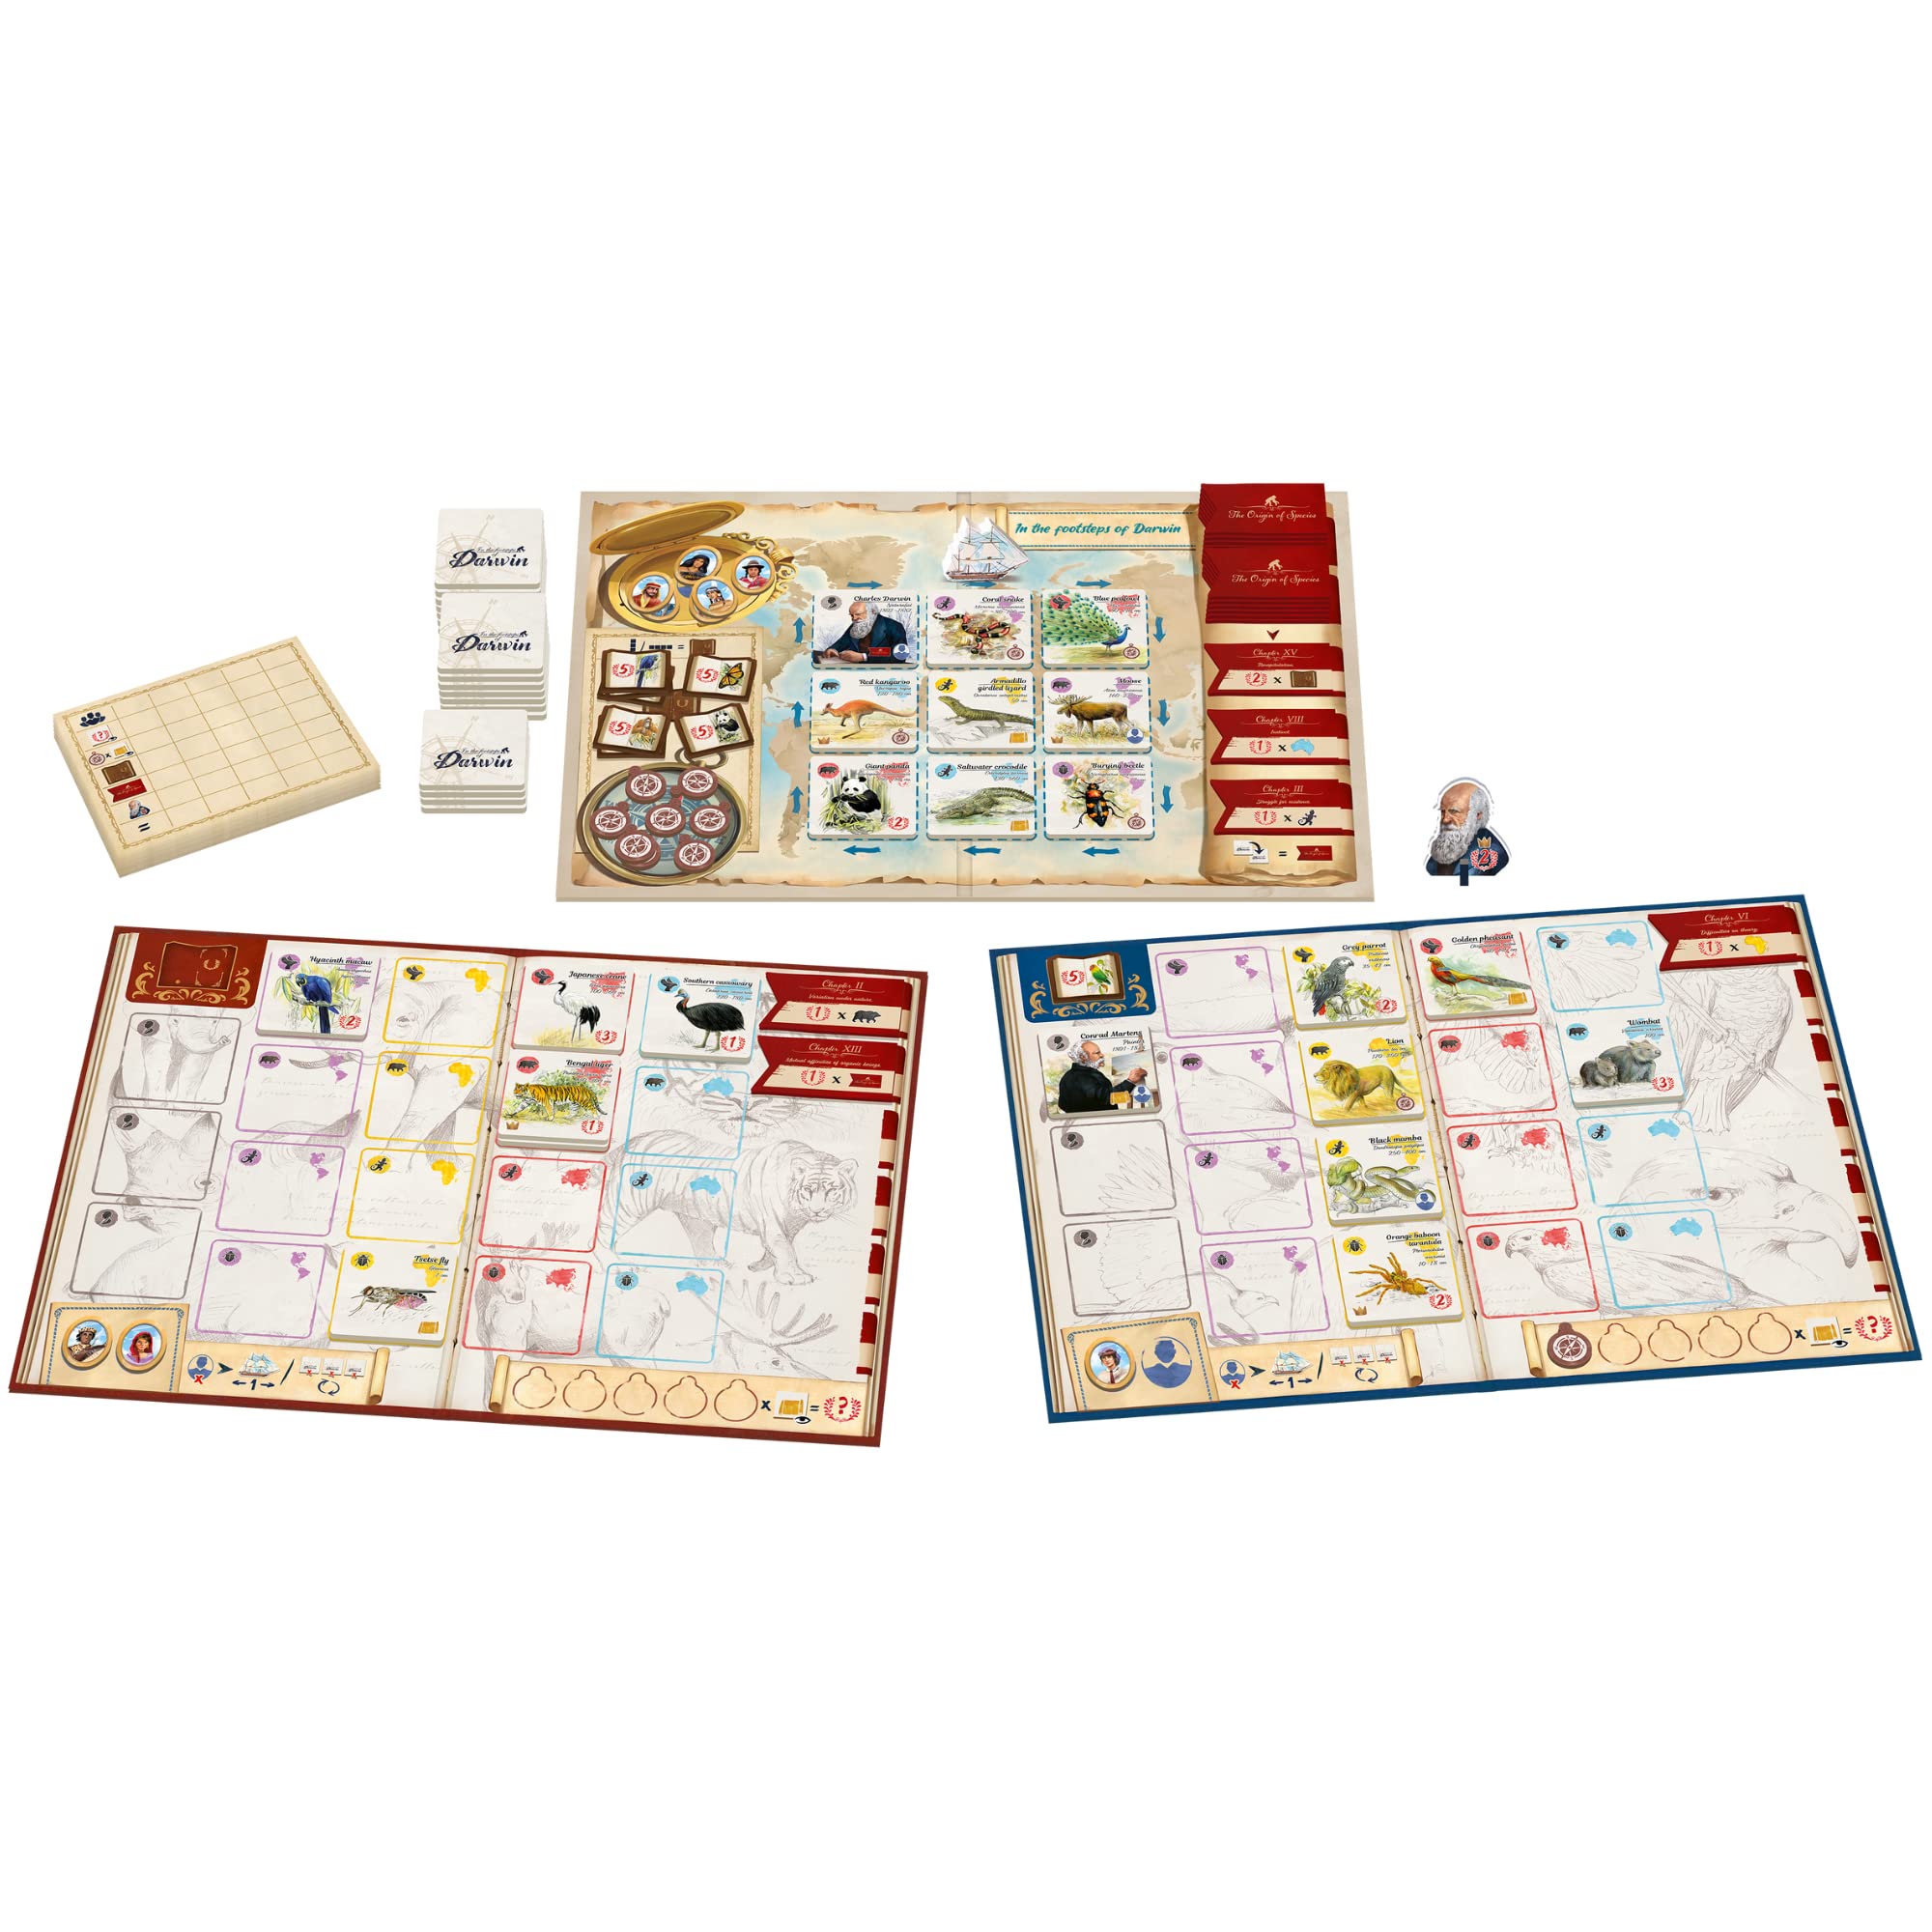 in The Footsteps of Darwin | Tile Laying Board Game | Ages 8+ | 2 to 5 Players | 30 Minutes